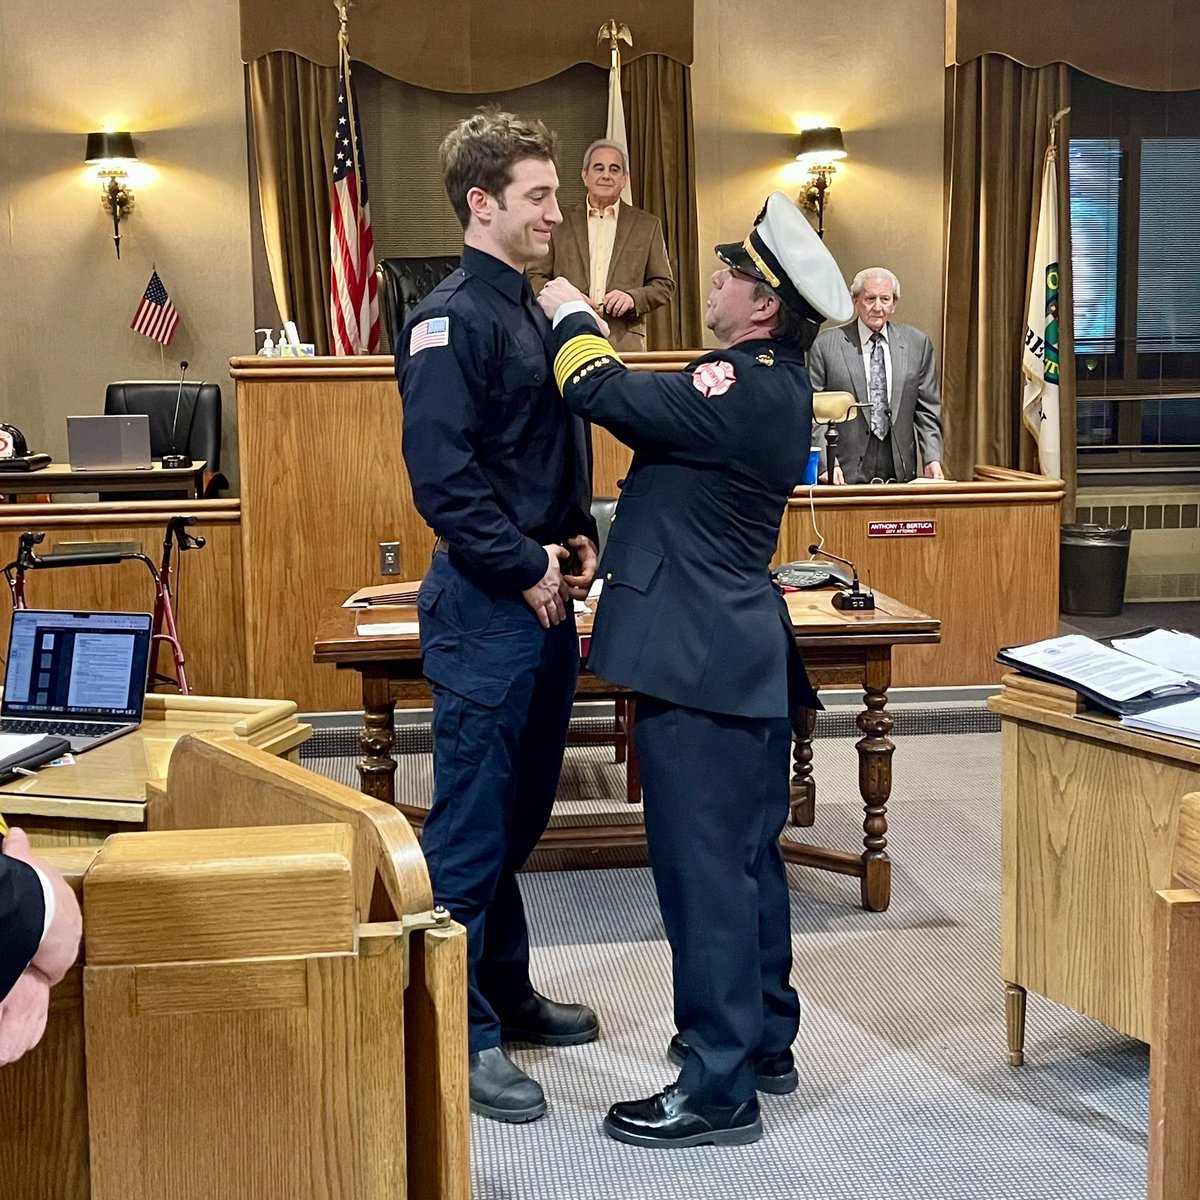 At this week’s City of Berwyn council meeting, we welcomed our newest probationary firefighter/paramedic Calvin Woodard to the BFD! #Local506Cares 👍♥️👨‍🚒 #TuNosImportas